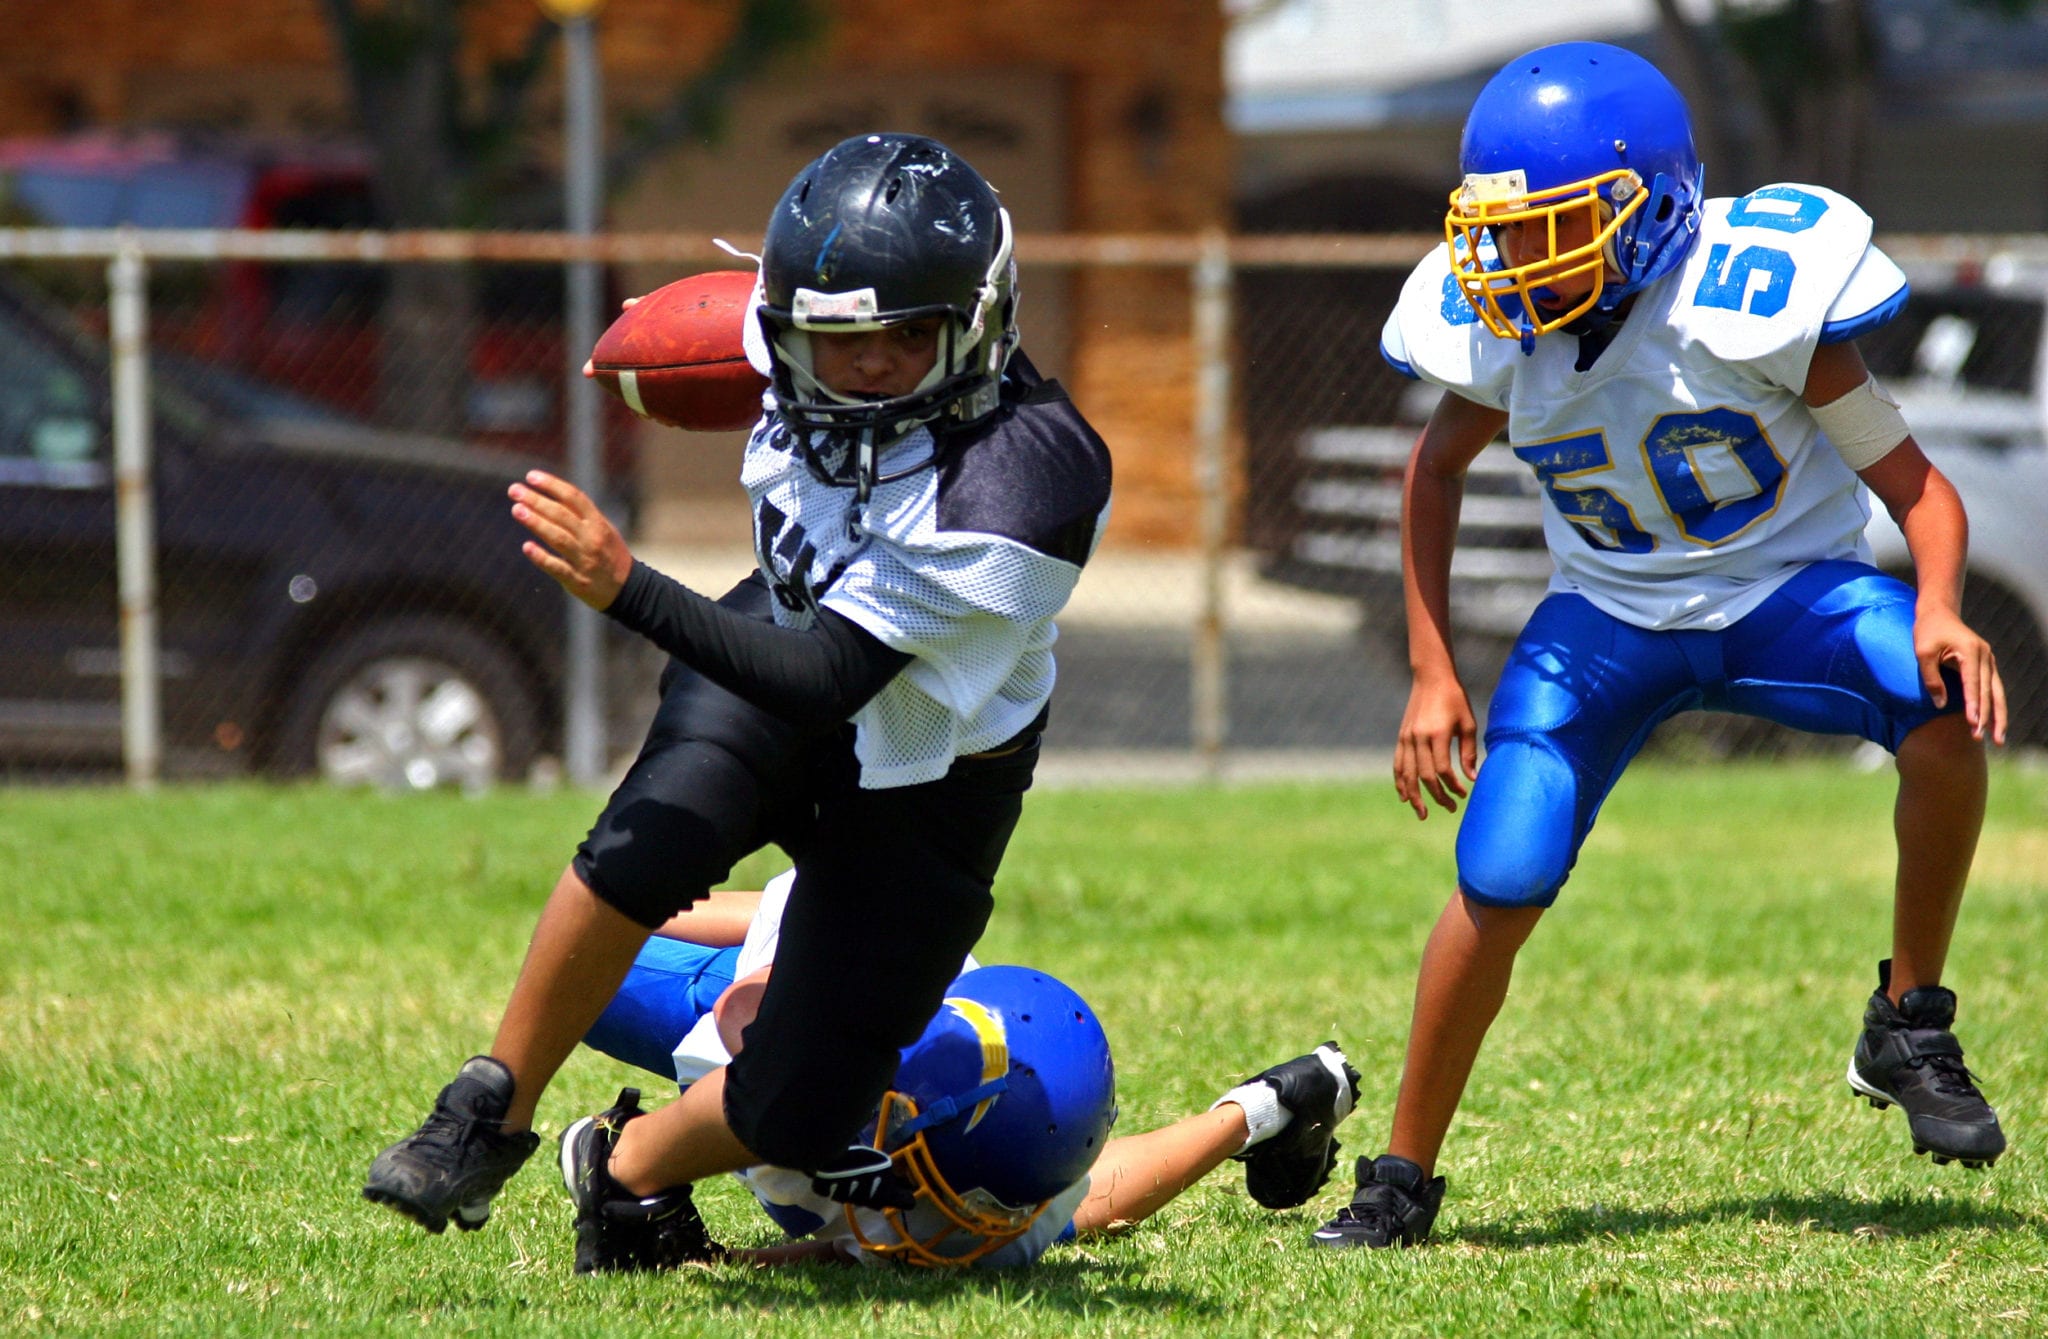 How to Prioritize Return to Learn After an Injury in Sports